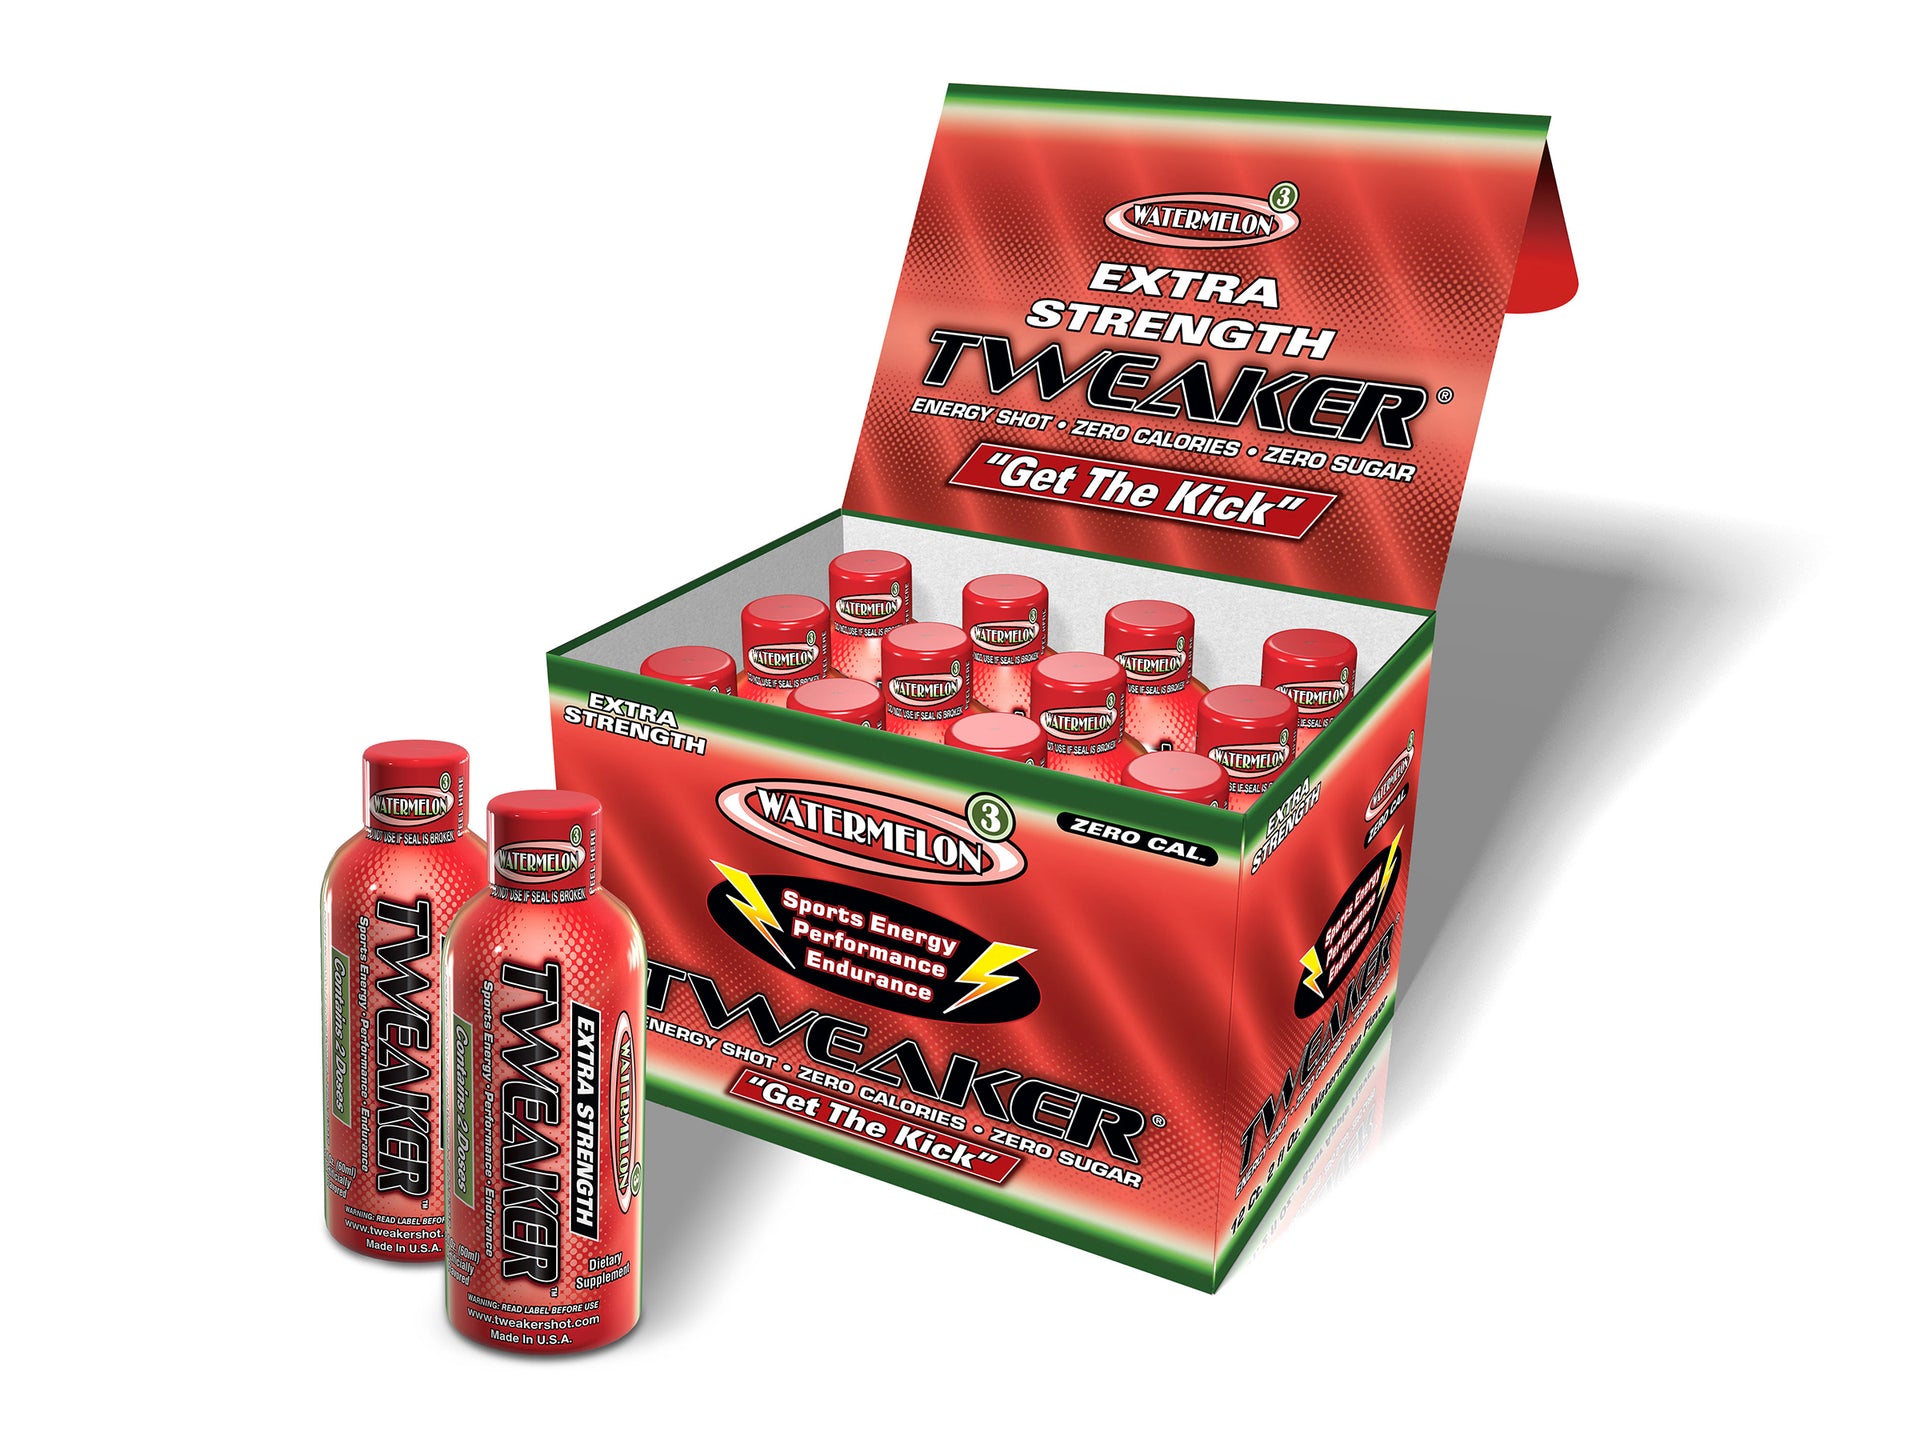 Image shows 12-ct caddy of Extra Strength Tweaker Energy Shot, Watermelon Flavor